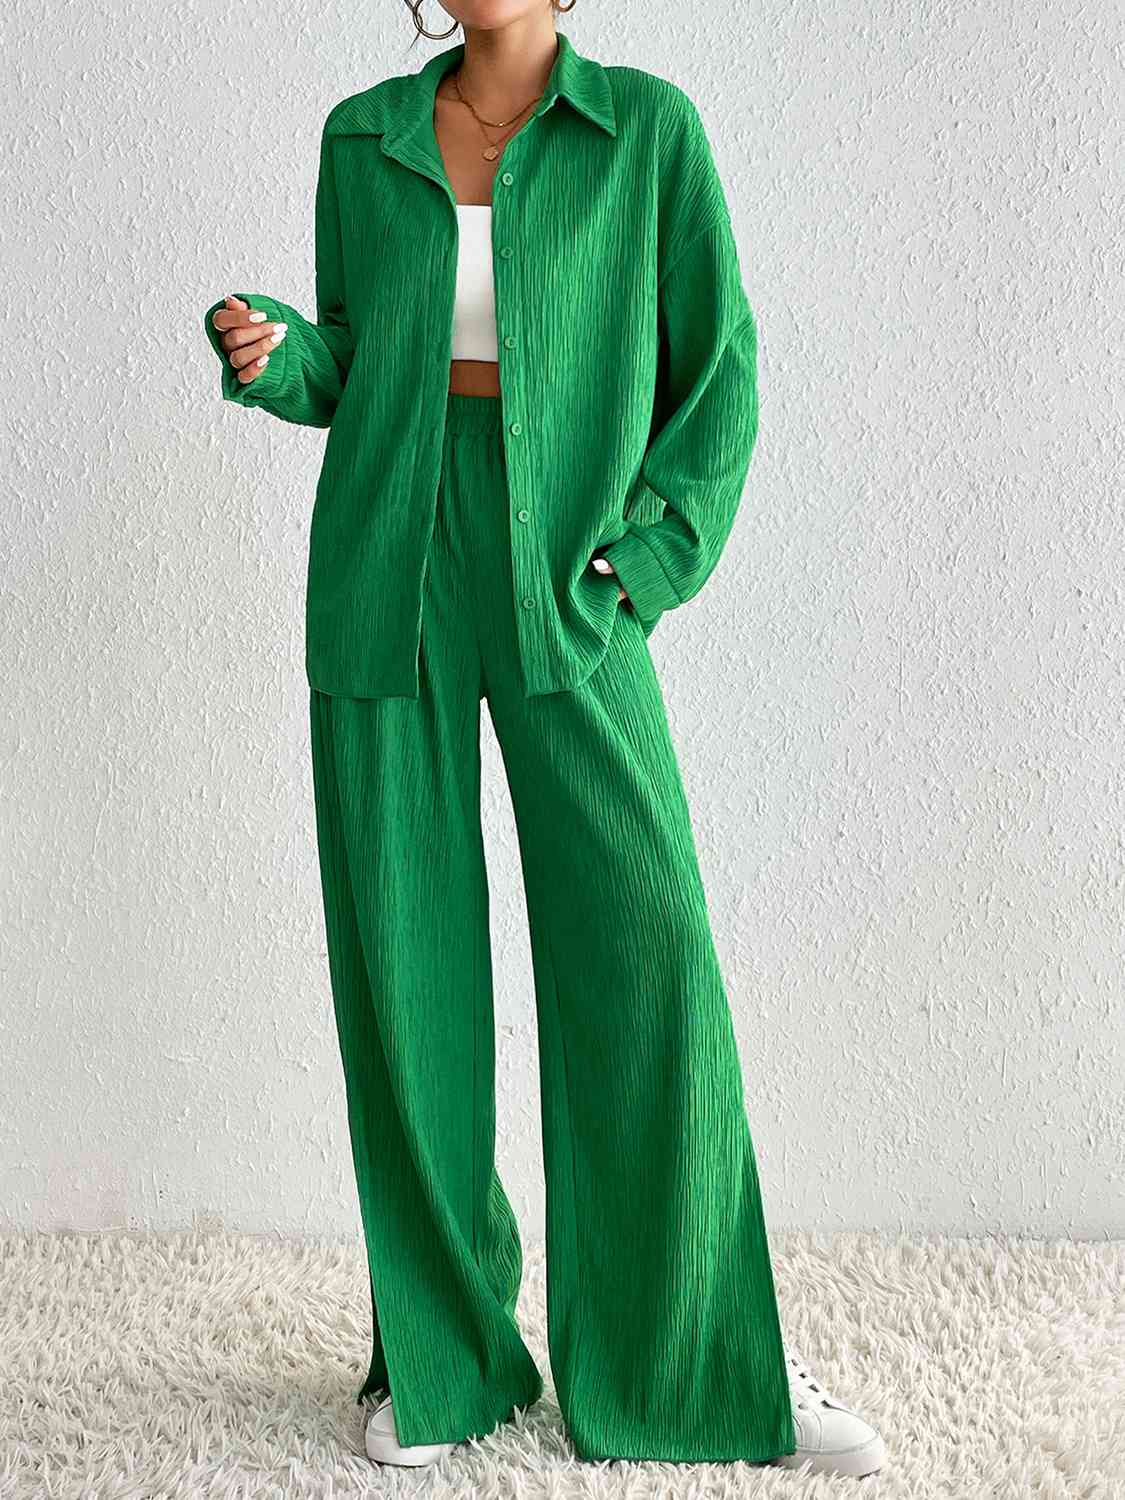 Green Collared Shirt and Pants - Wedeh's Fashion